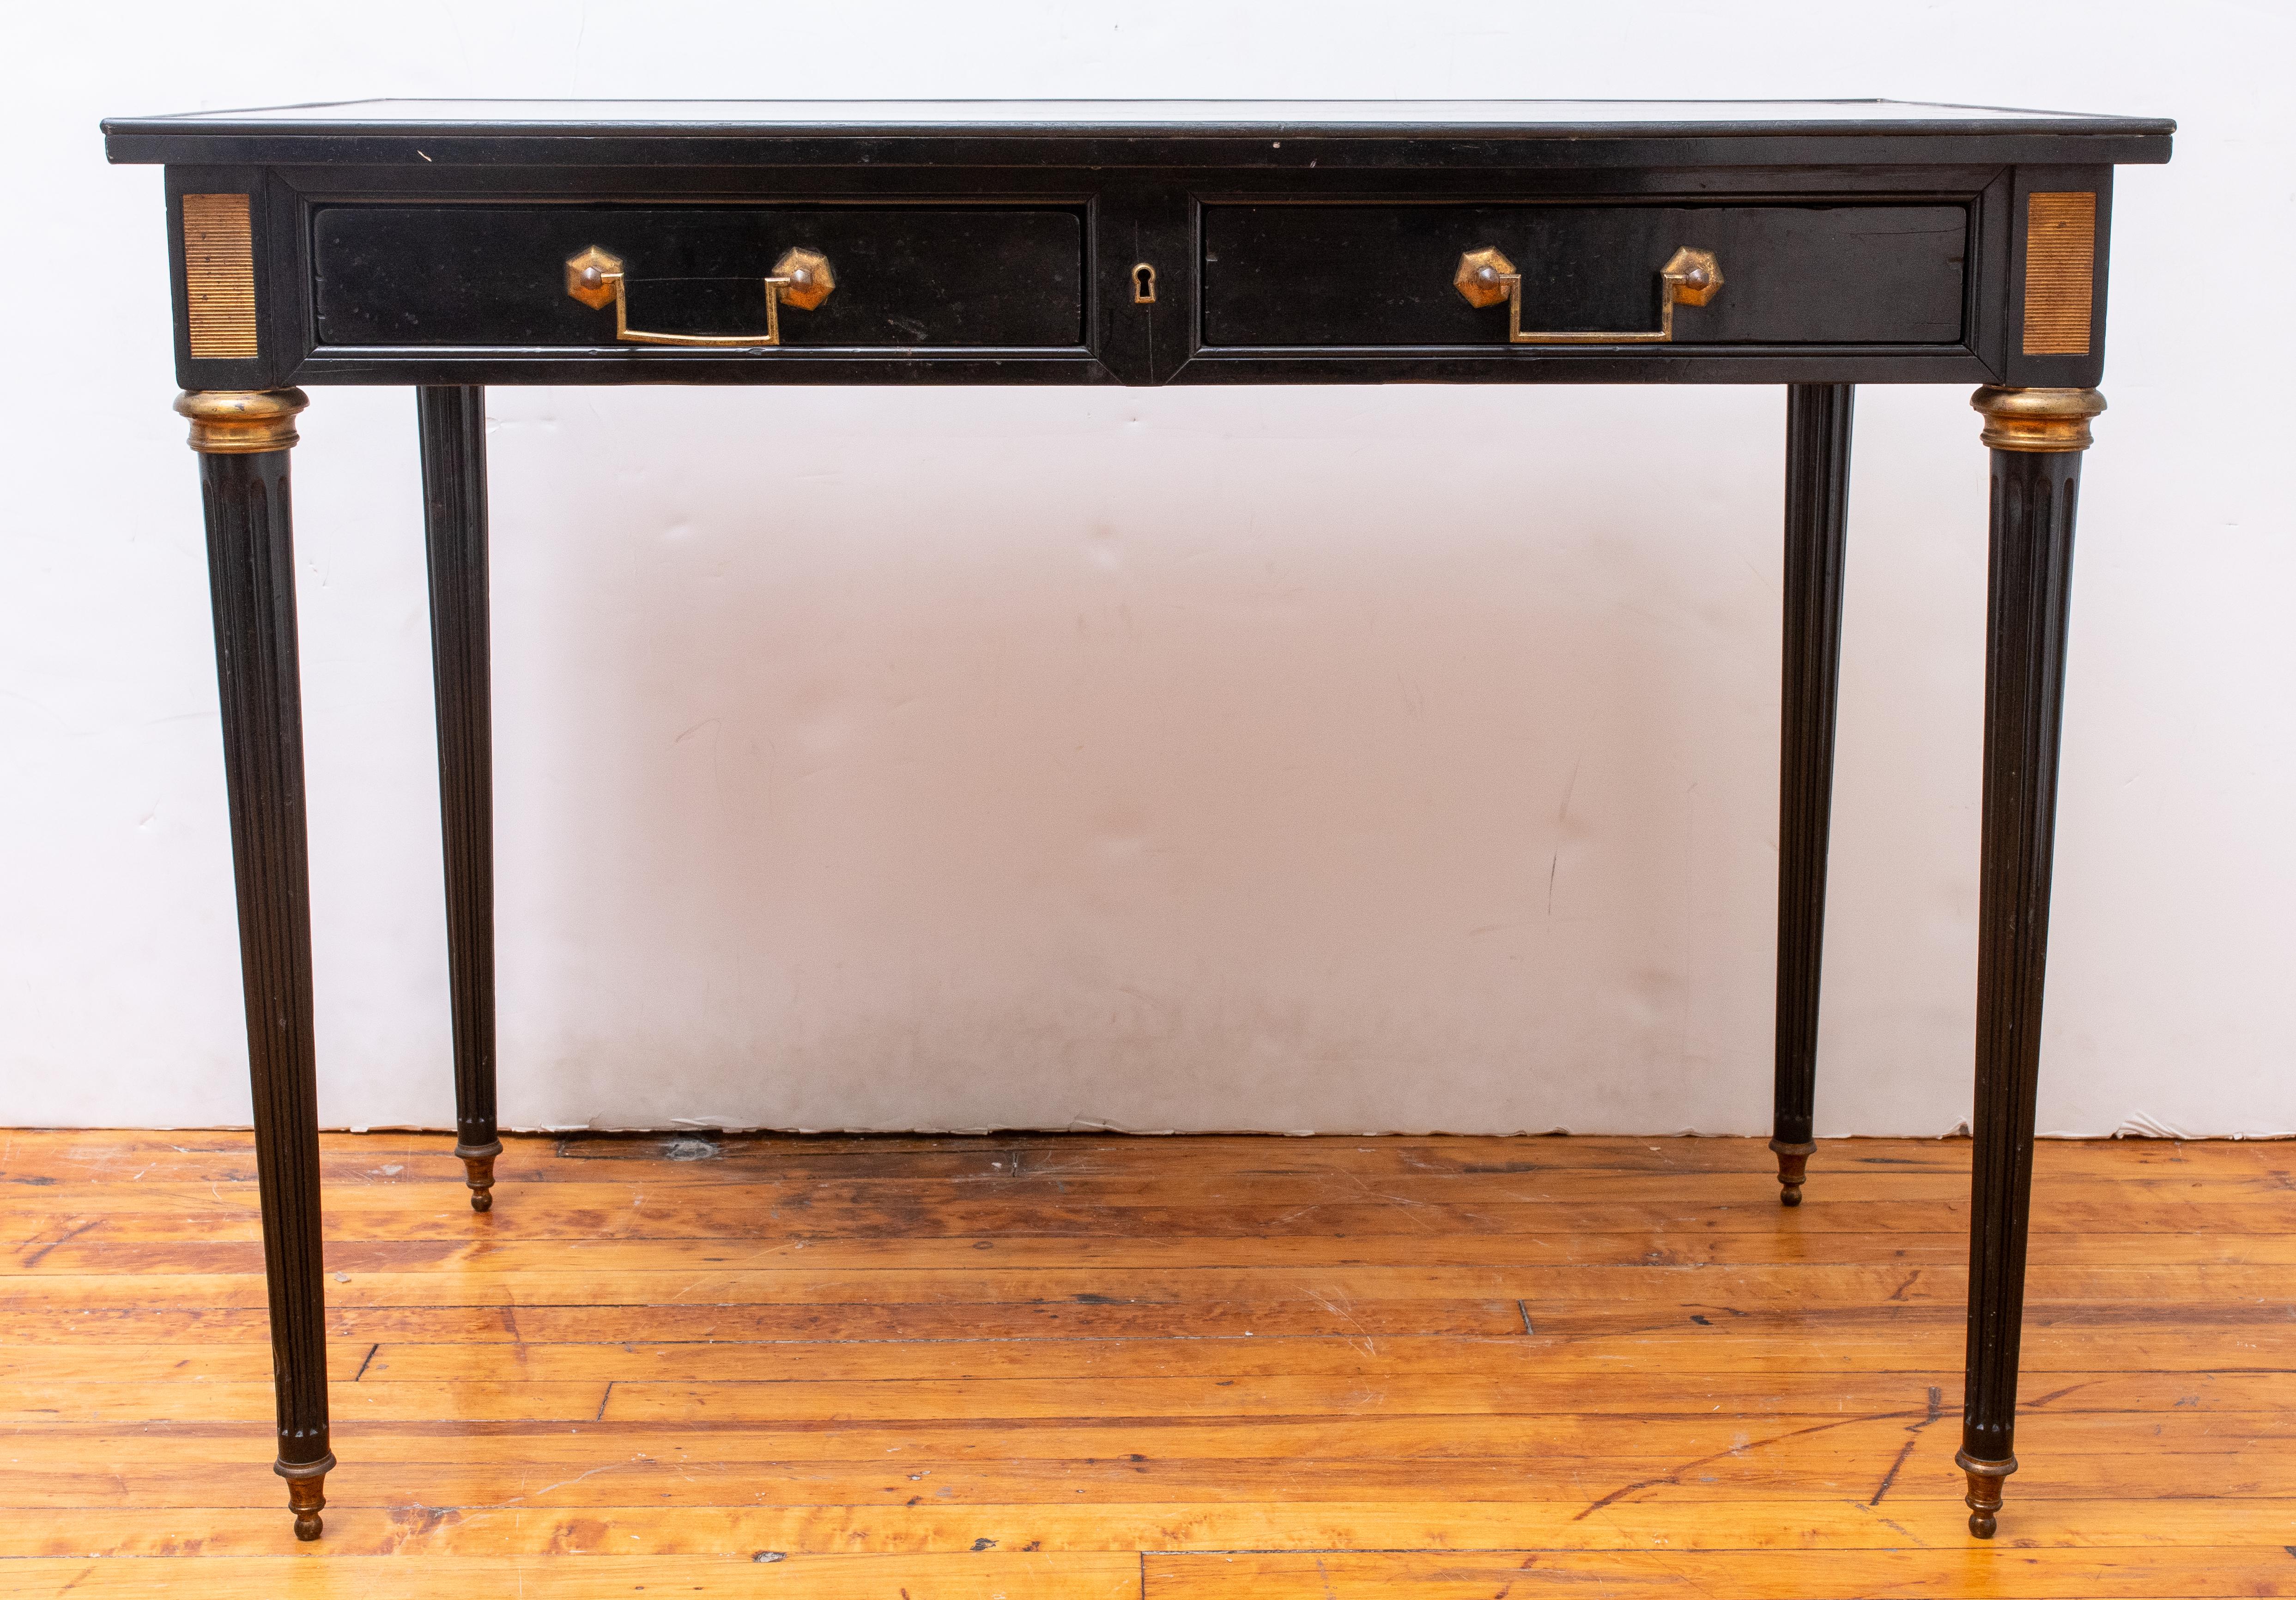 French Louis XVI Style ebonized and gilt metal-mounted bureau plat in the manner of Jansen, rectangular top above two drawers, the corners headed by paterae, the tapering fluted columnar legs terminating in toupie sabots.

